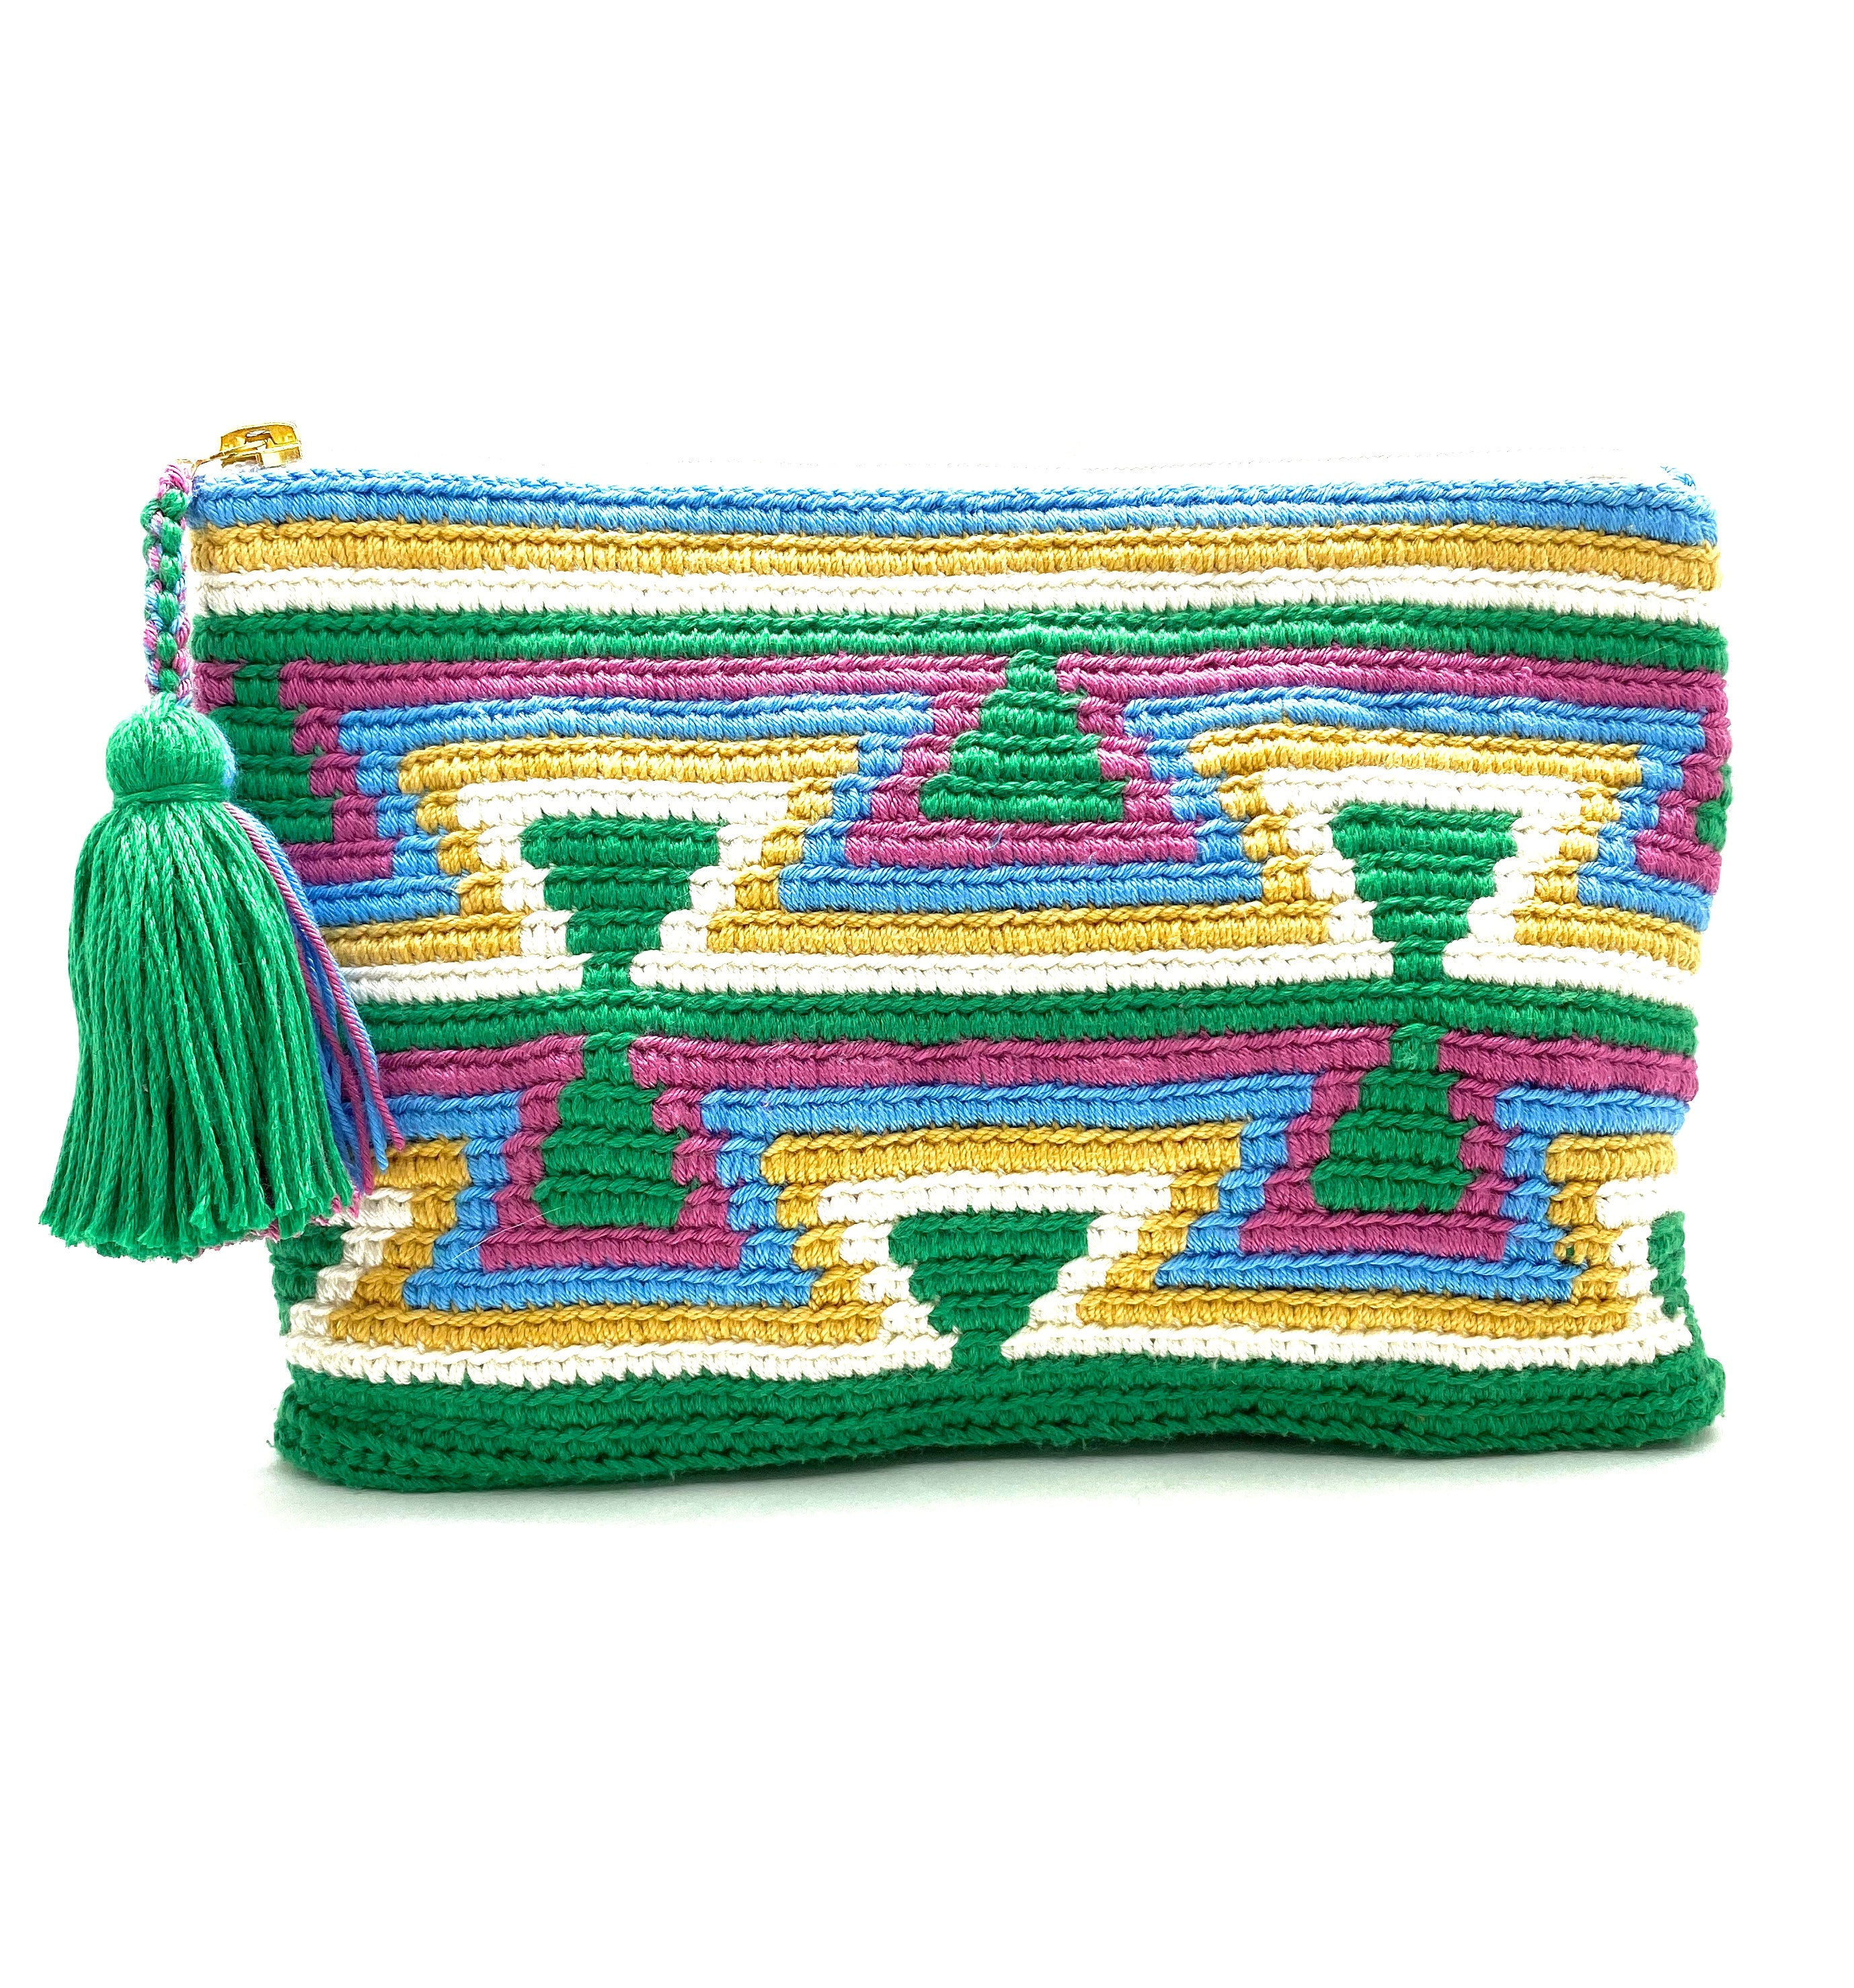 Green body clutch, green inverted triangles, white, yellow, blue, purple sequence, and tassel.